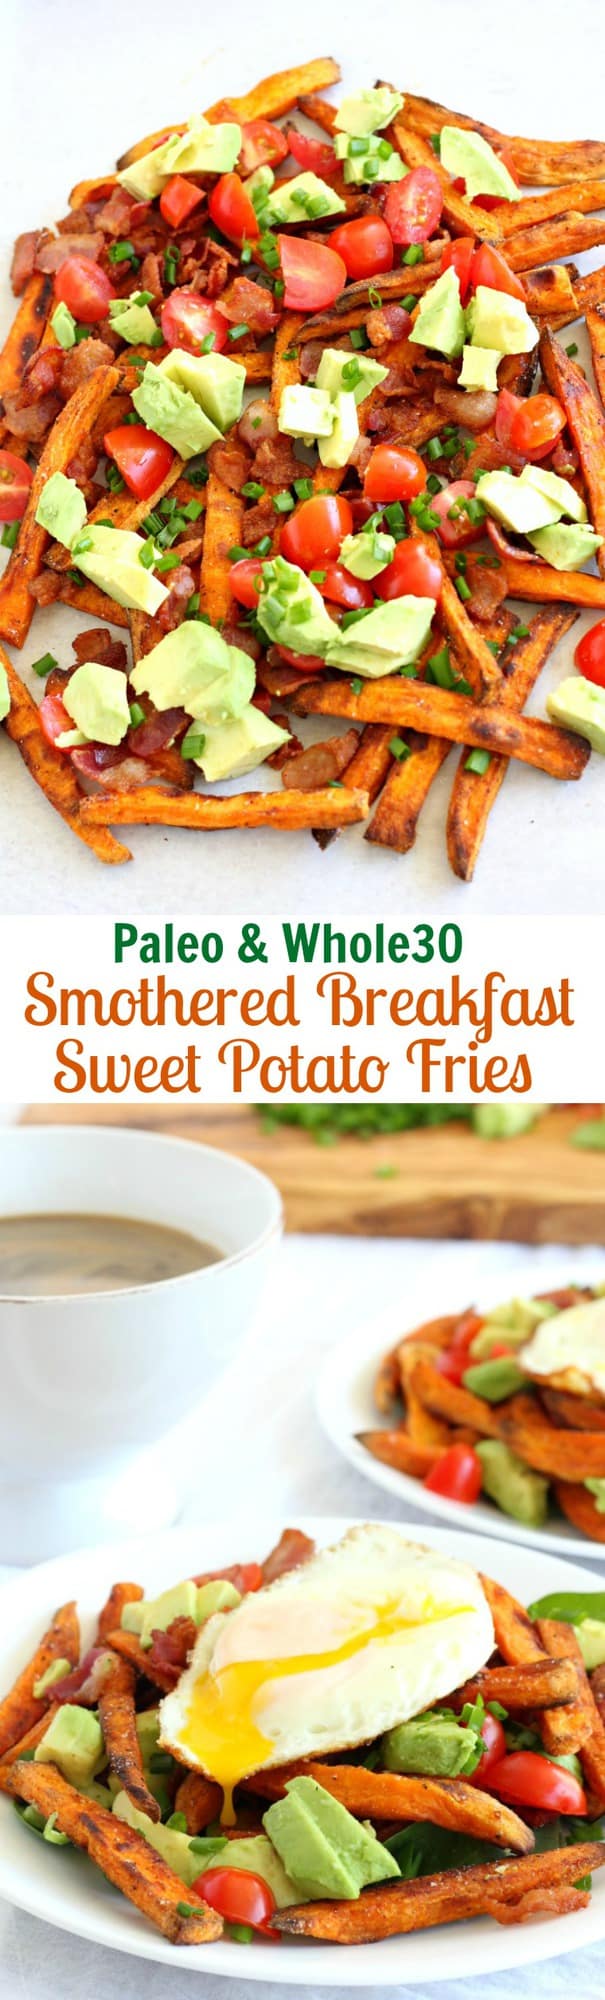 Smothered Breakfast Sweet Potato Fries - Paleo and Whole30 friendly! Crispy baked sweet potato fries are topped with bacon, tomatoes, avocado, chives, and fried eggs!